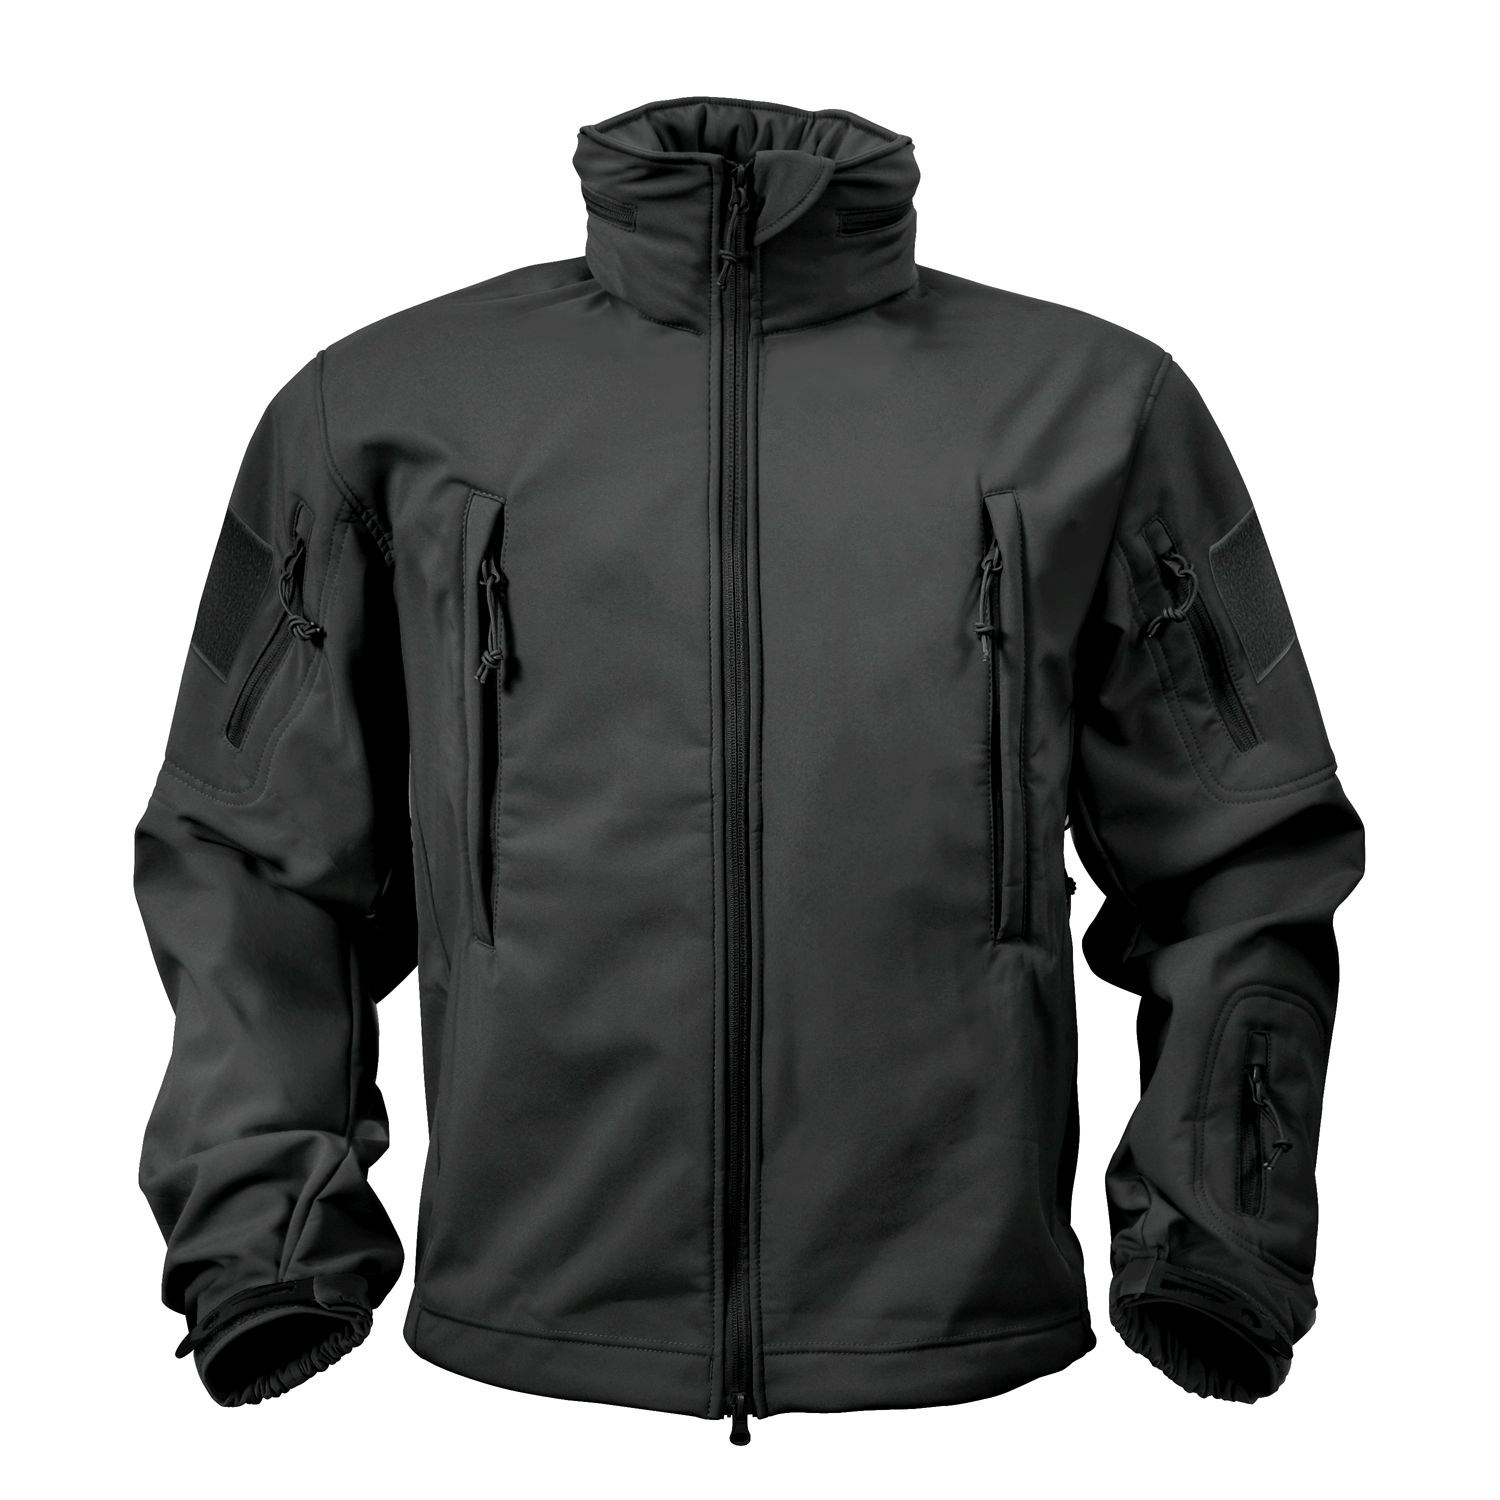 Spec Ops Soft Shell Security Jacket BLACK ROTHCO 97670 L-11